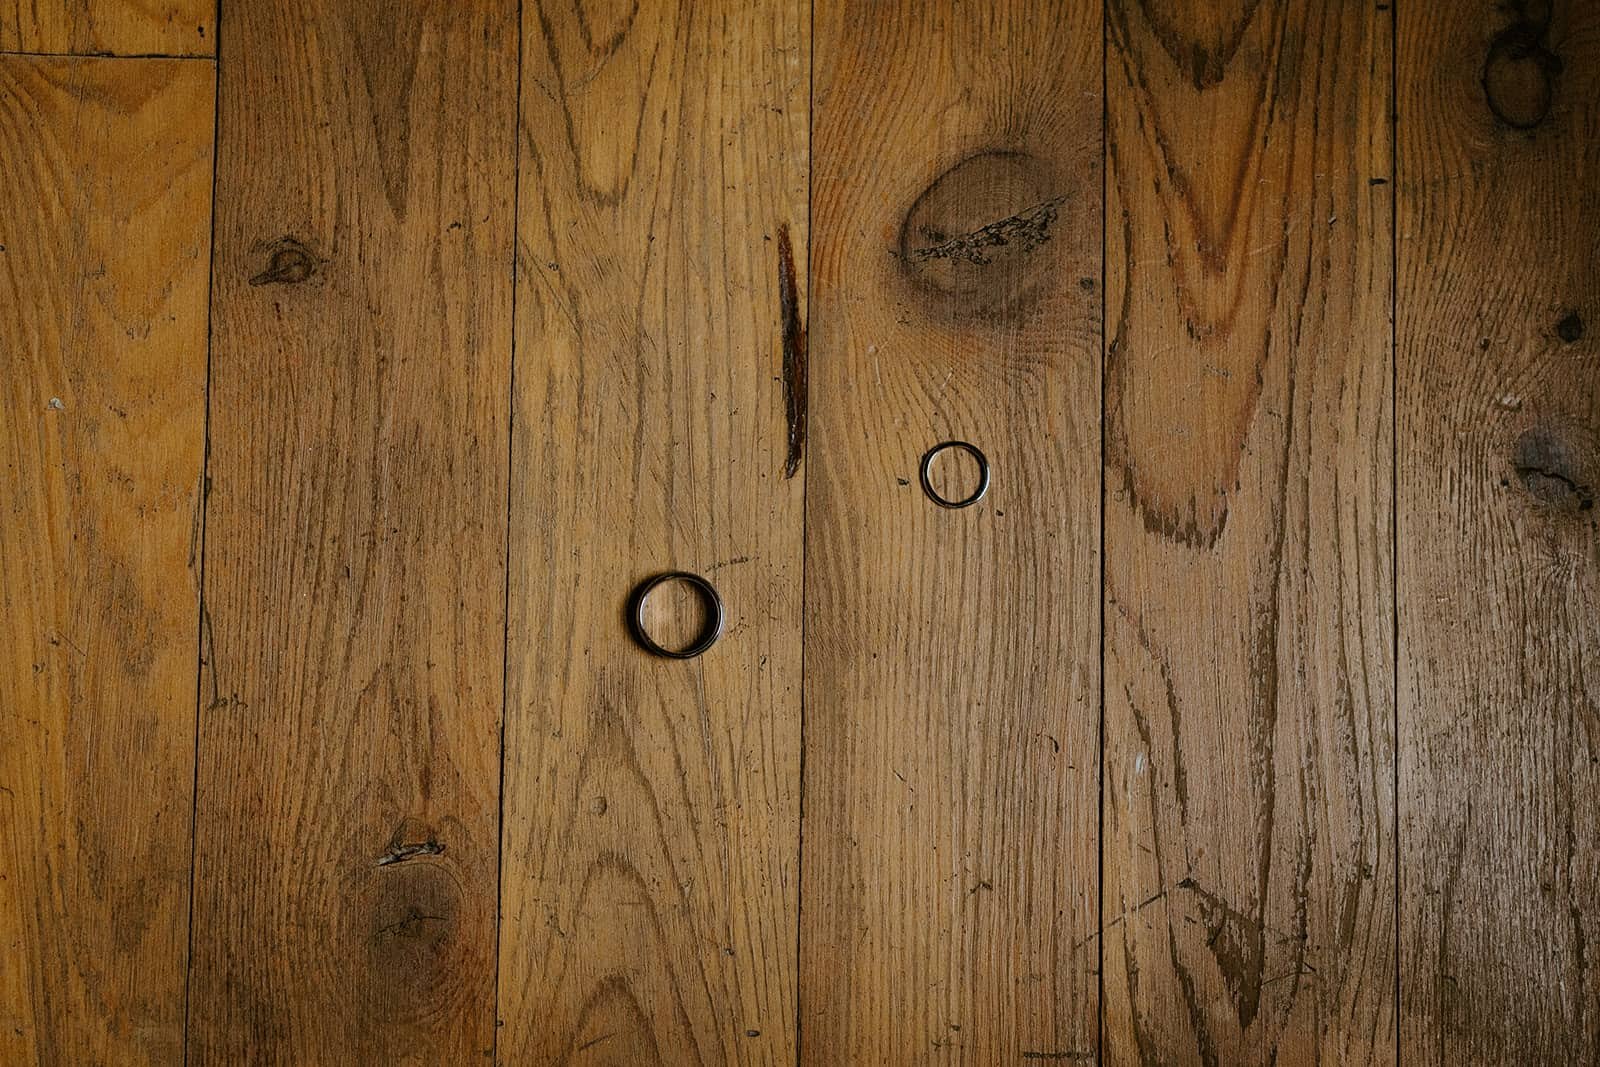 two rings sit on a wood floor